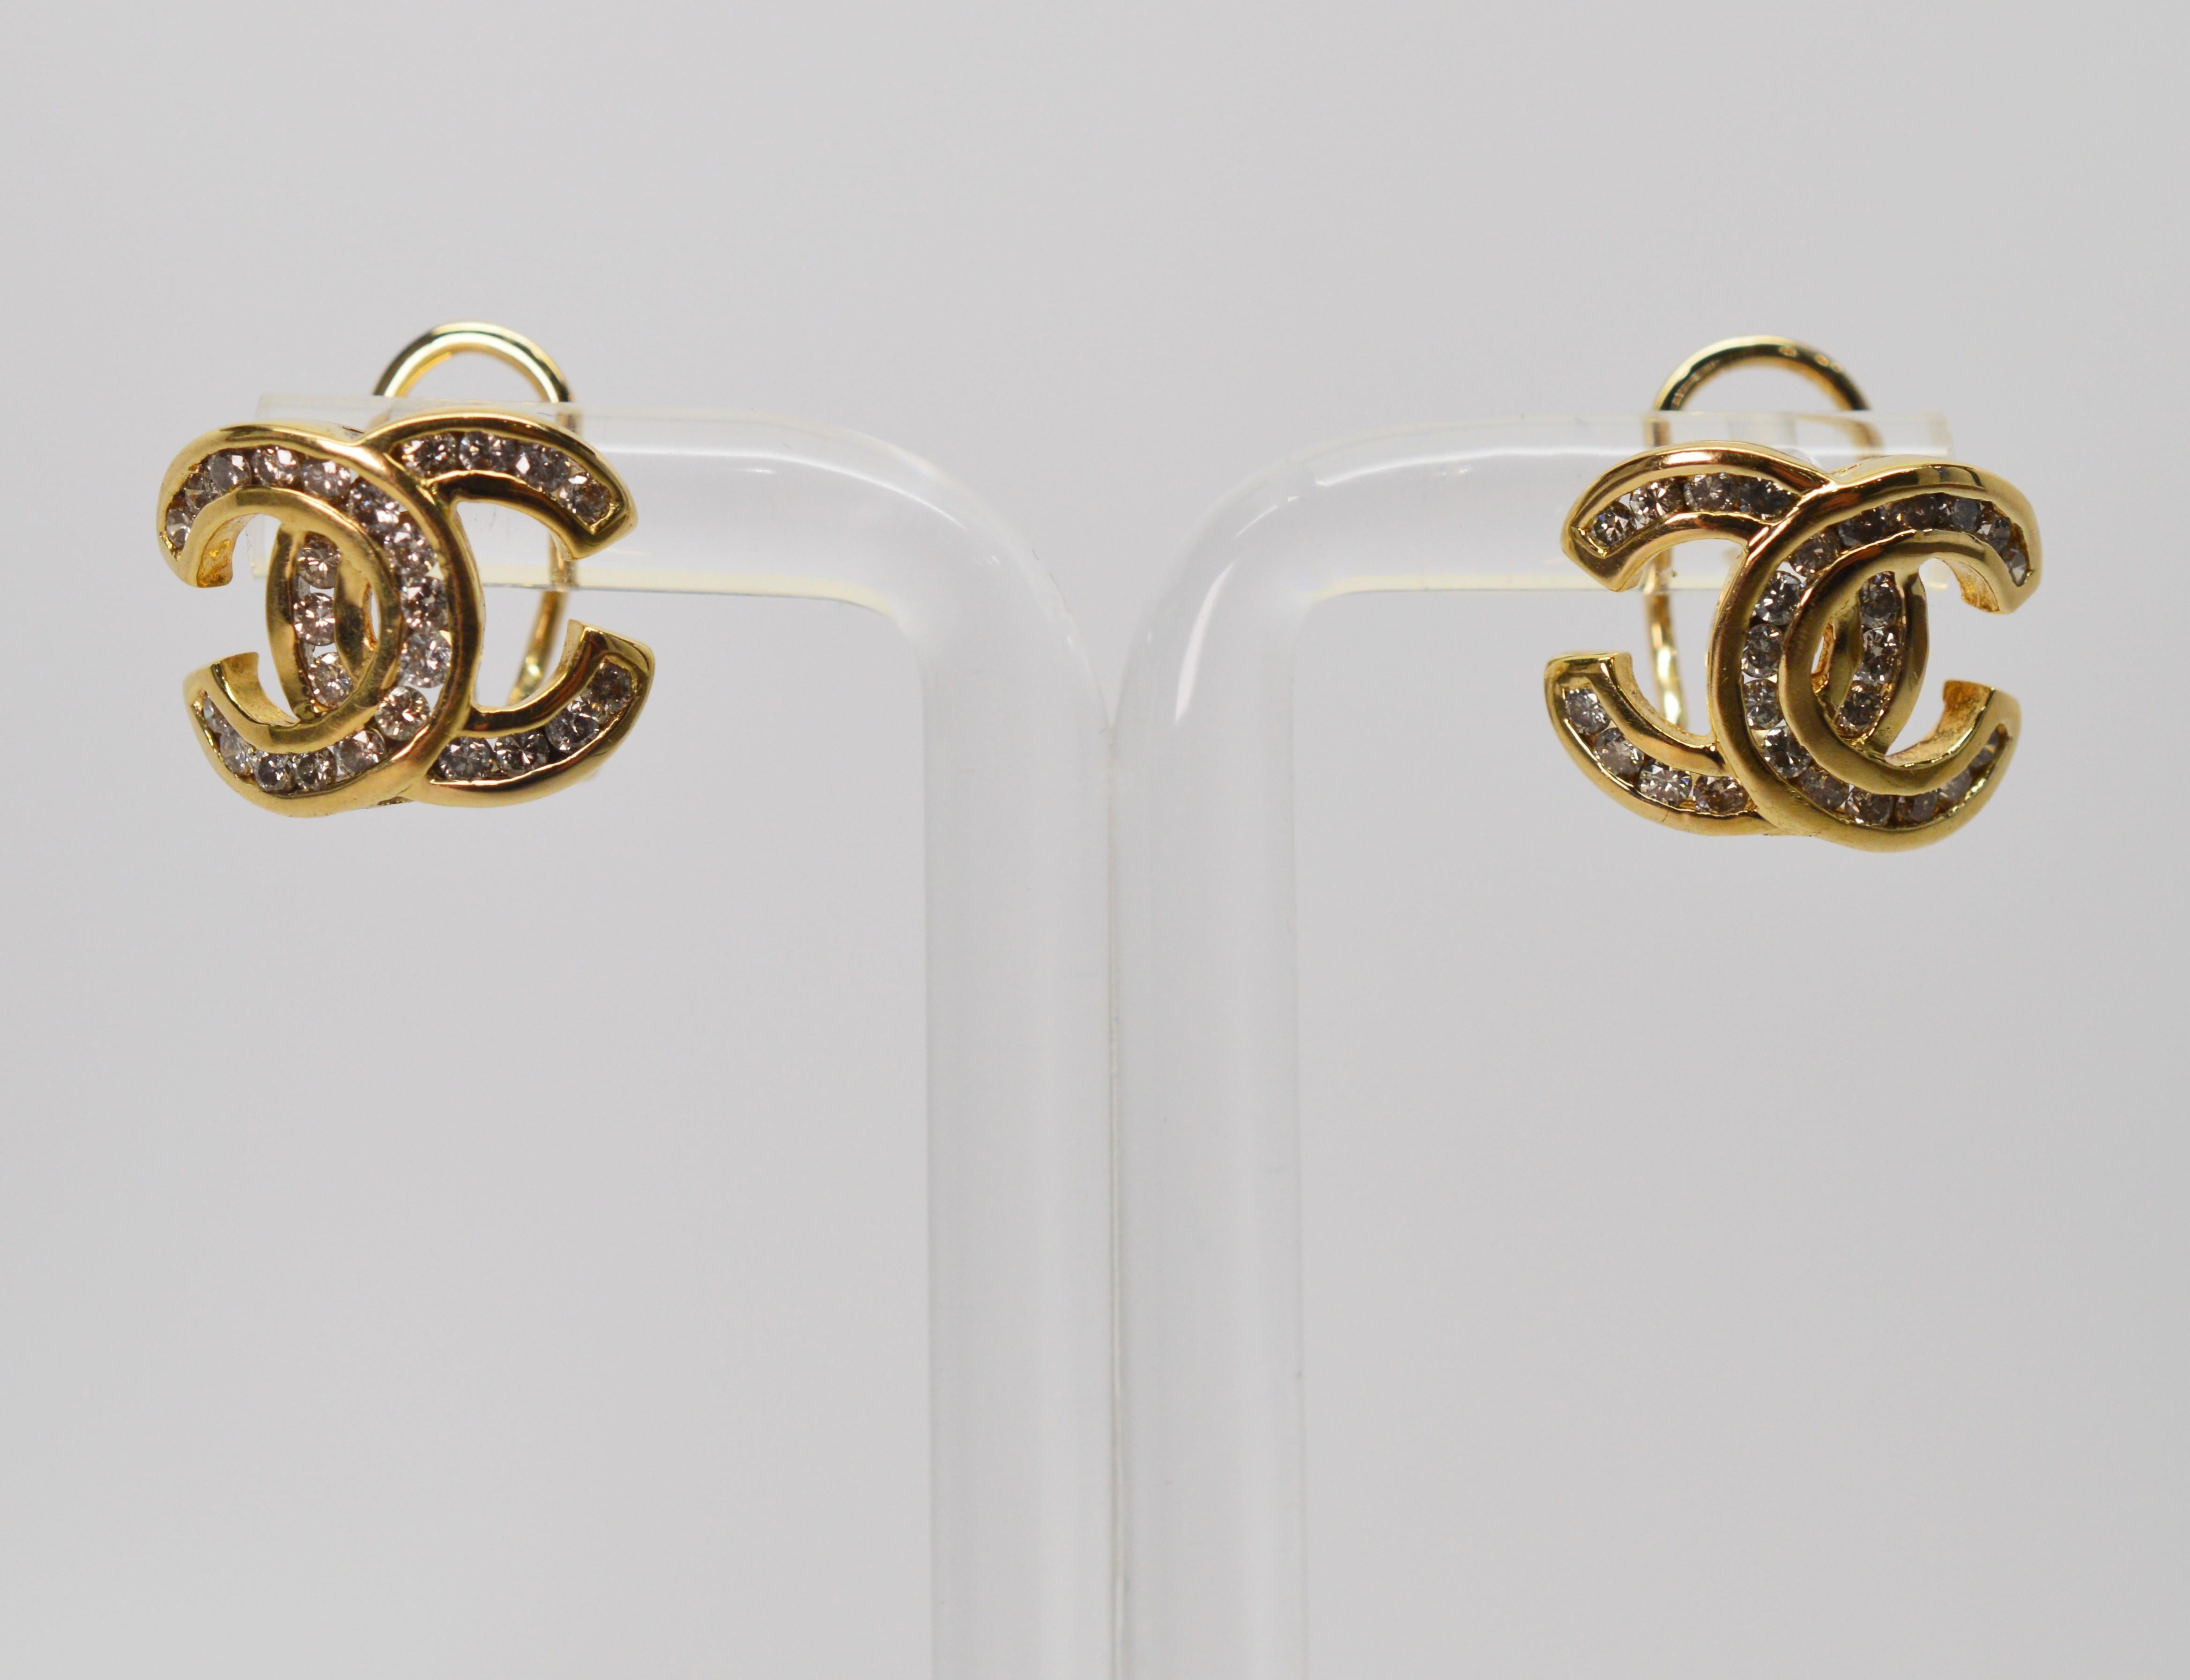 A mirror image letter C, signifying true style in fourteen carat yellow gold and accented with fifty diamonds with a total weight of one half carat make these earrings for pierced ears outfitted with a post and omega clip. In gift box. 